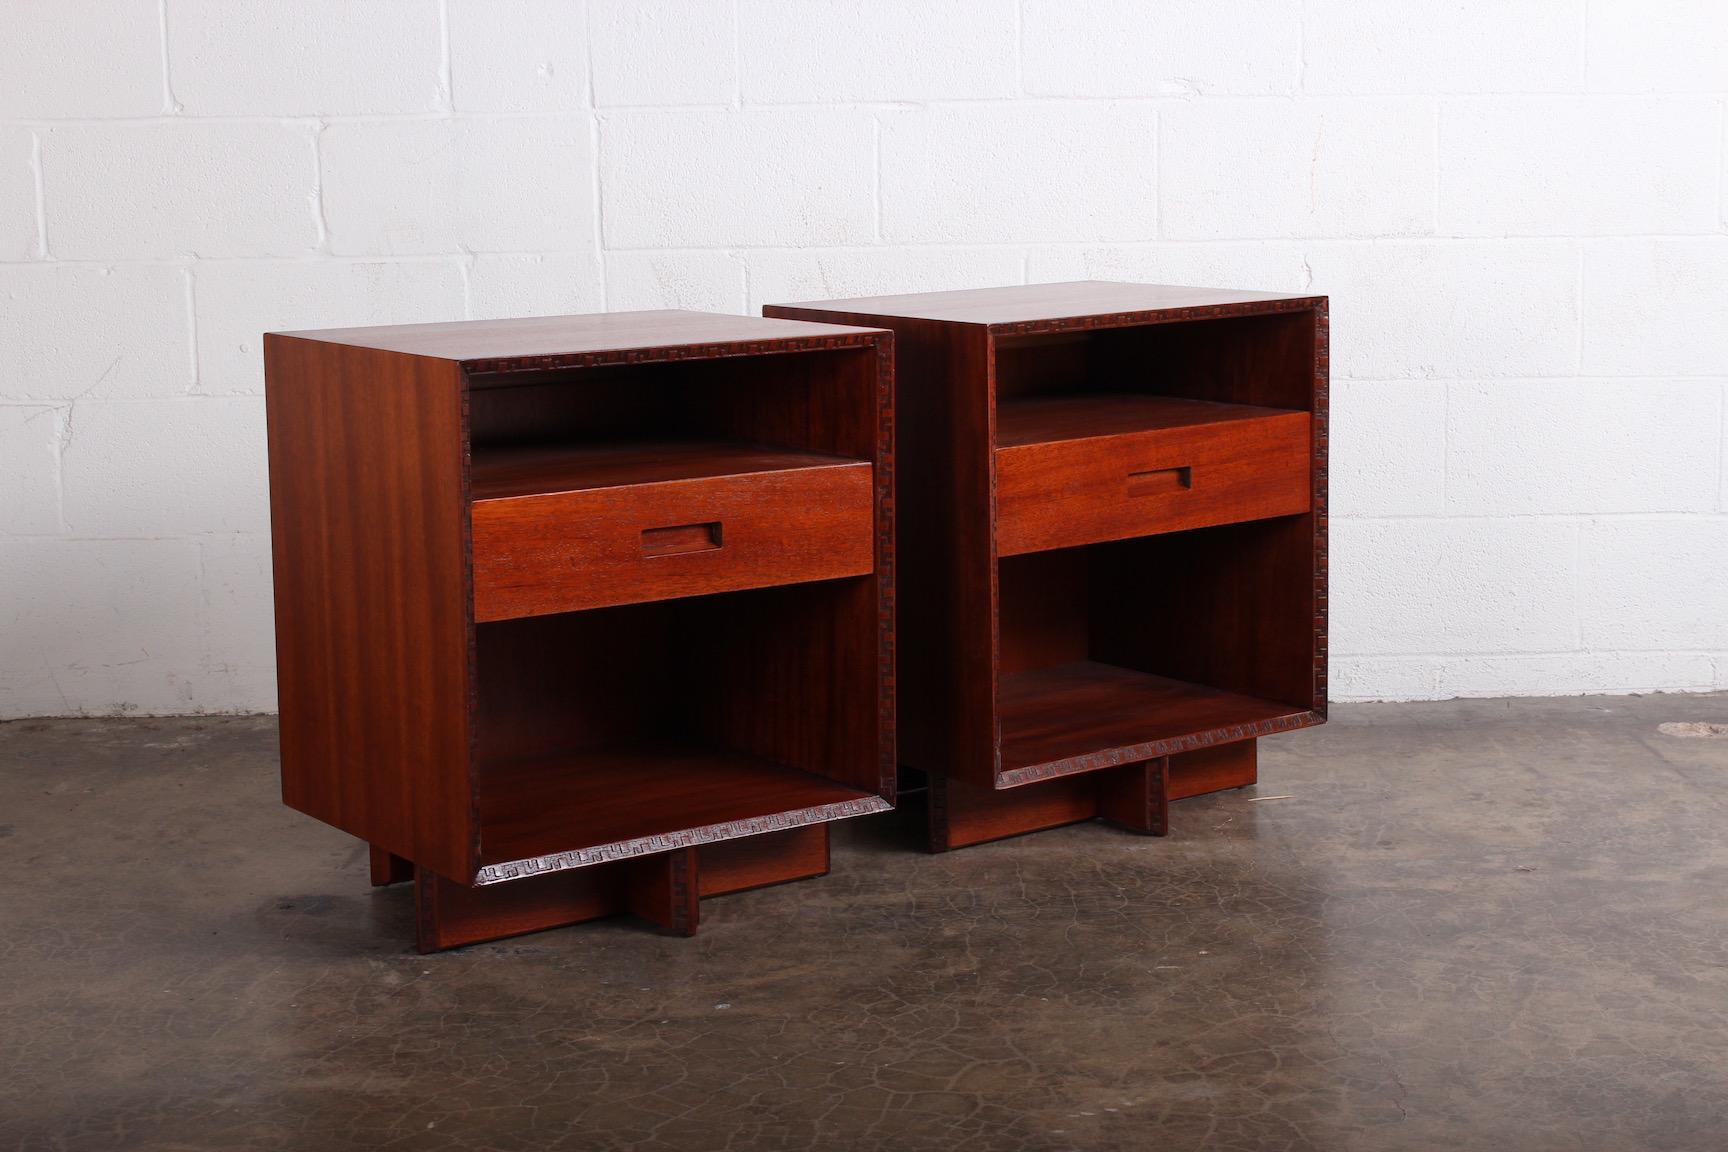 Mahogany Pair of Nightstands by Frank Lloyd Wright for Henredon